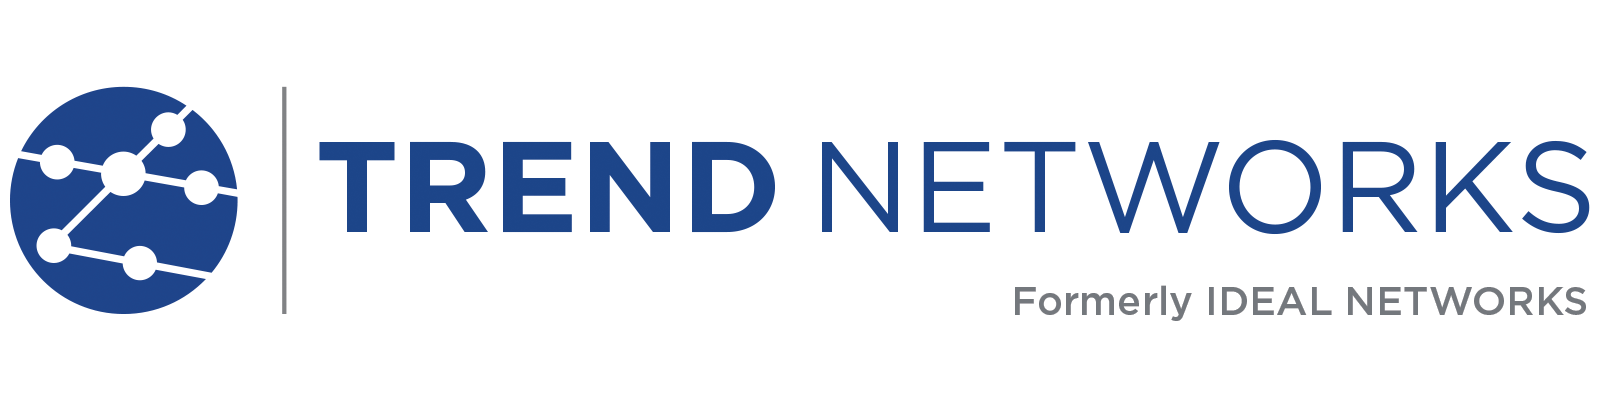 TREND NETWORKS logo formerly IDEAL NETWORKS